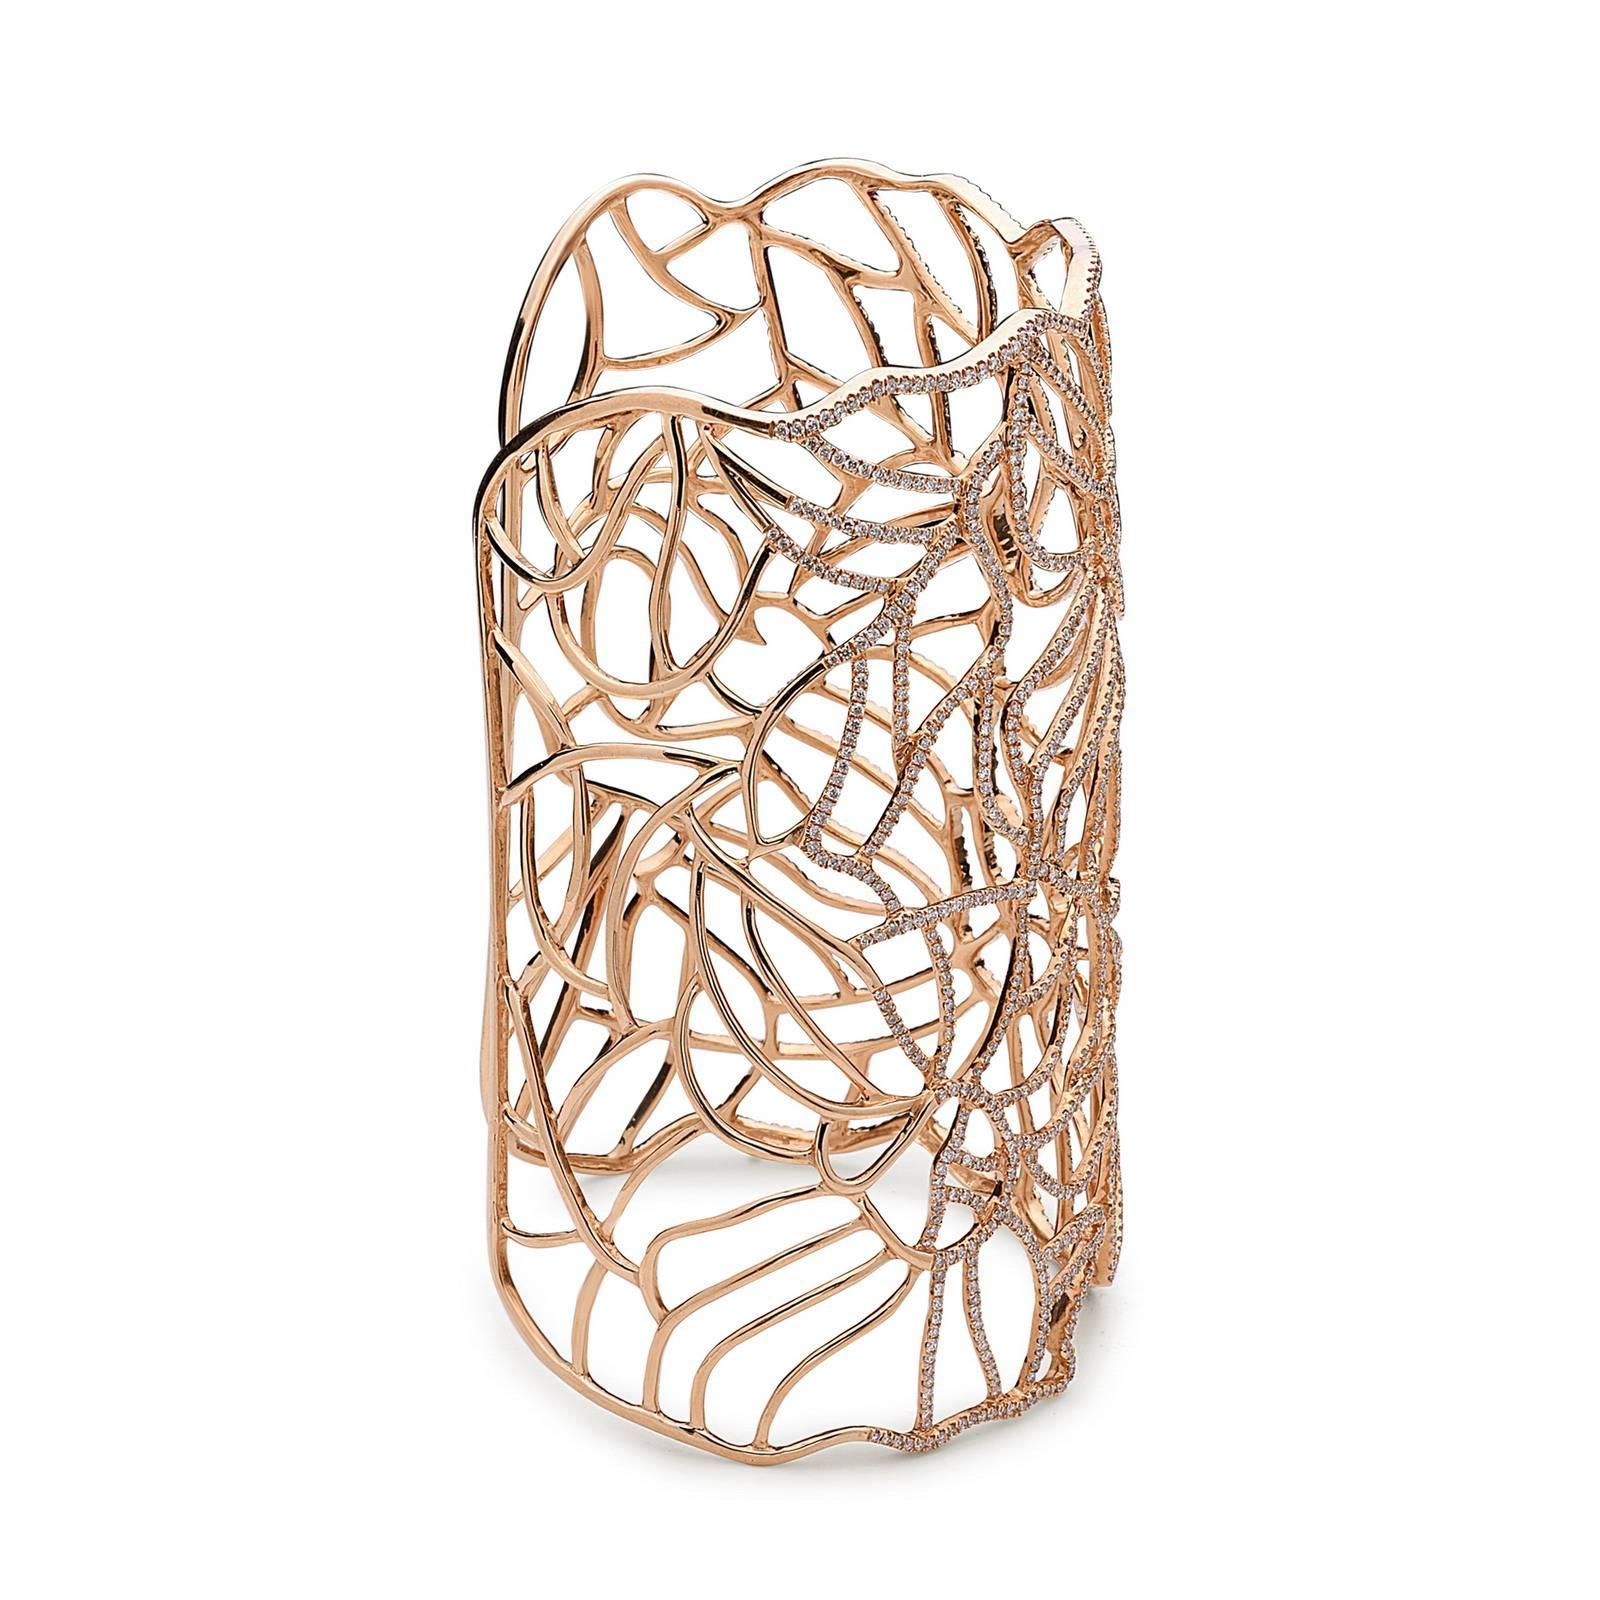 This gorgeous floral cut out Rose Gold Diamond Long Cuff is a statement cuff is for real. Wear it with any color outfit be the star of the party. The cuff is open from back side to easily slide on. Length of cuff: 3.75 inches, broadness of cuff